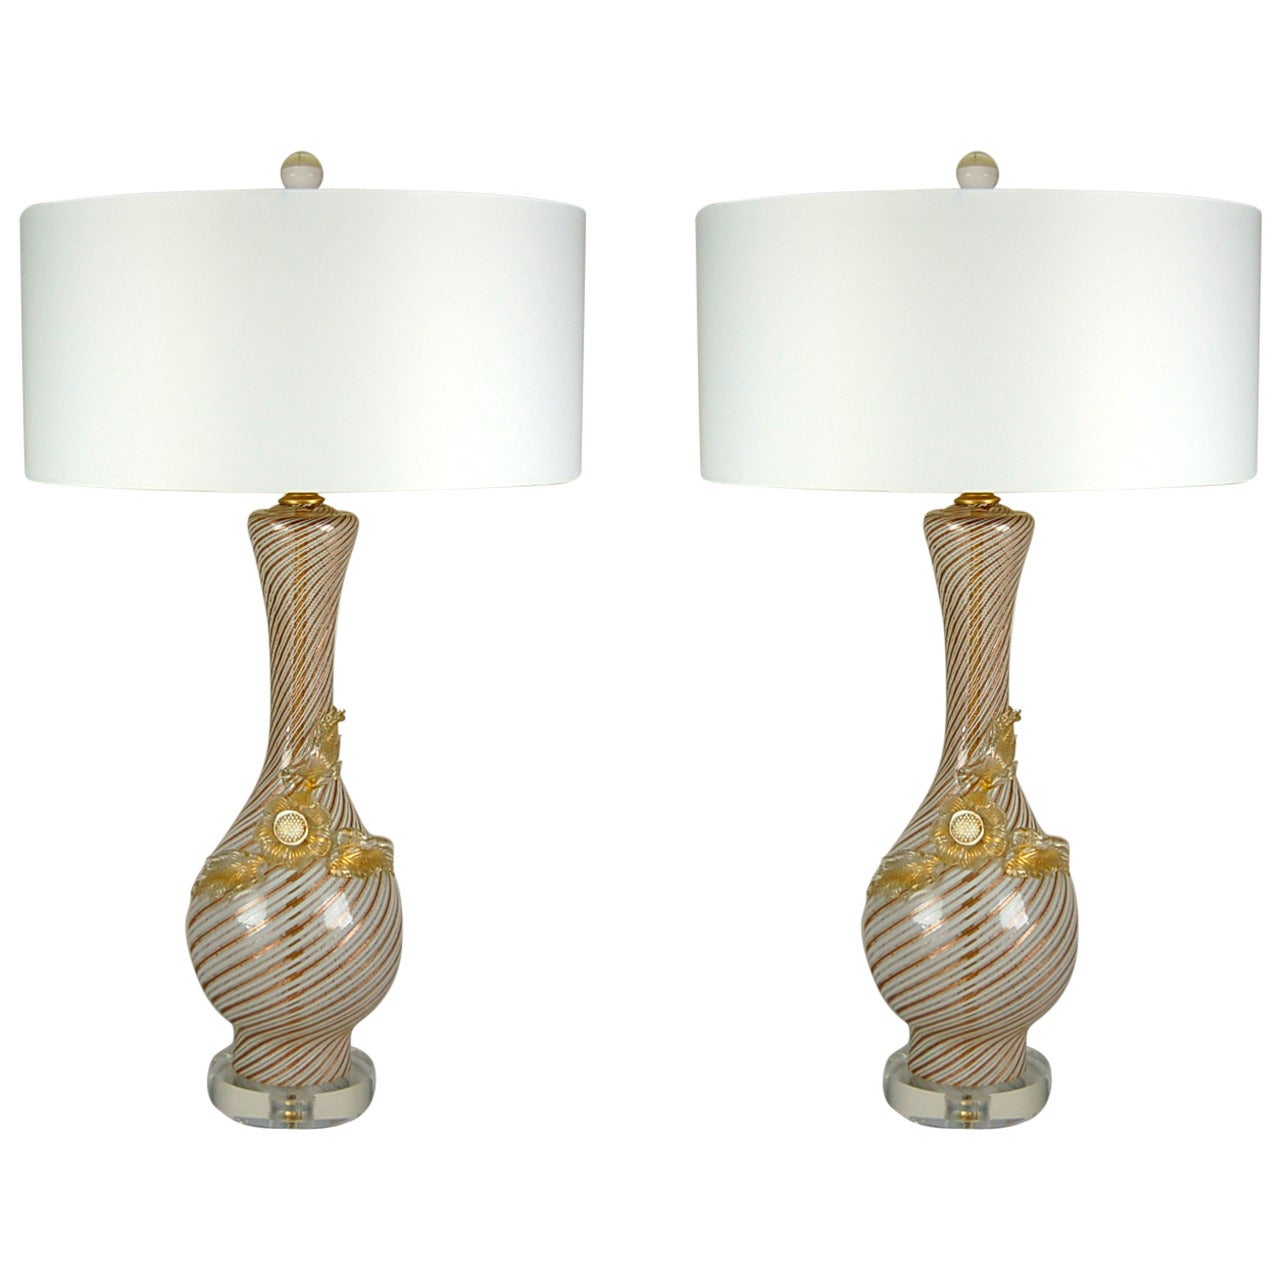 Pair of Vintage Filigrana Murano Lamps by Dino Martens For Sale